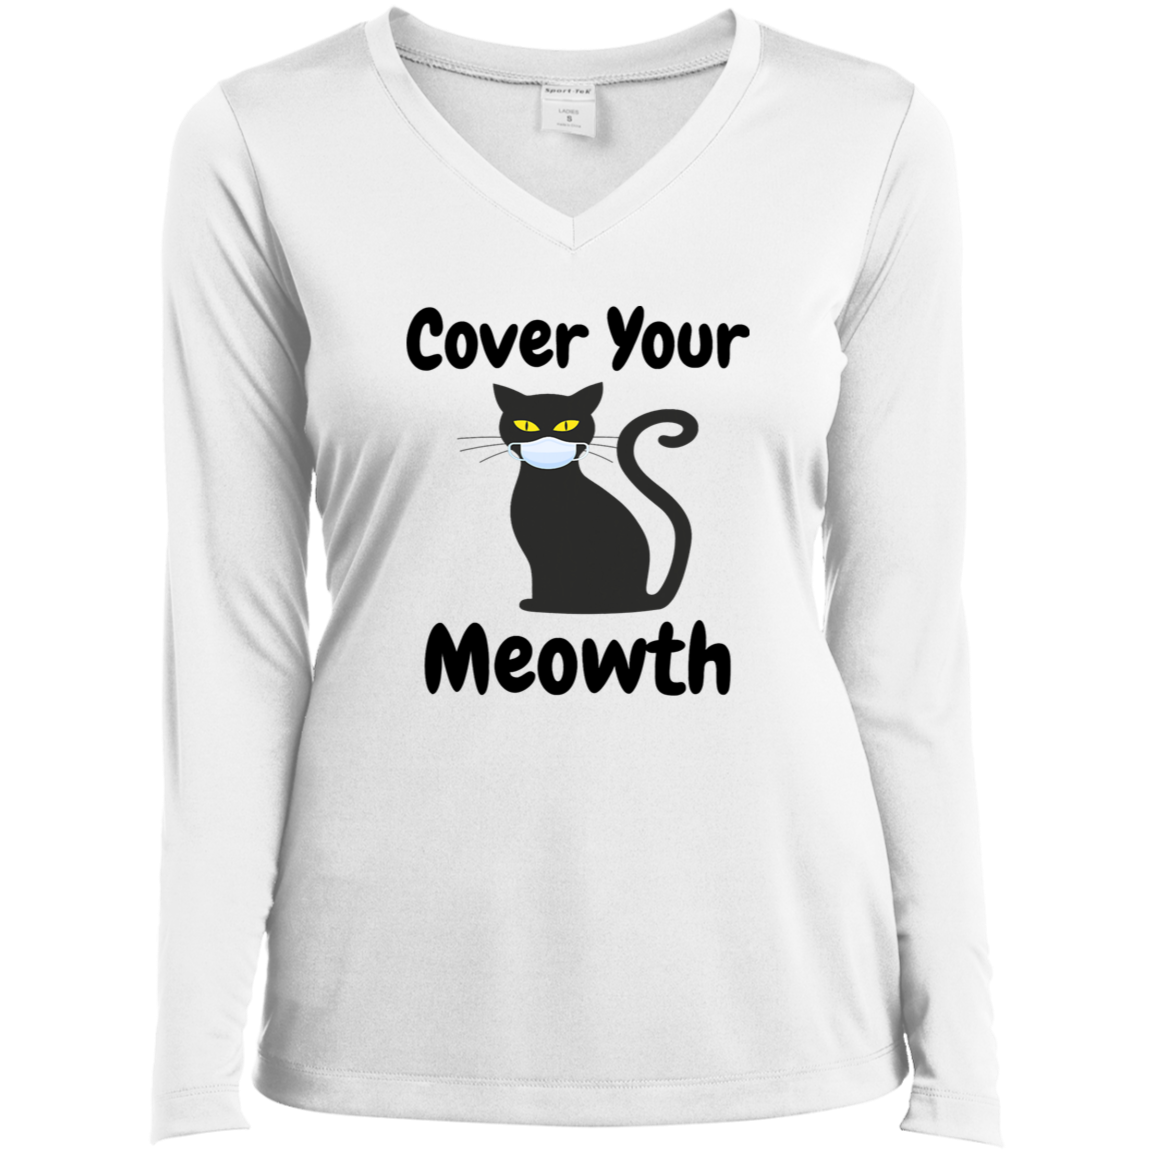 Cover Your Meowth Long Sleeve Performance V-Neck Tee